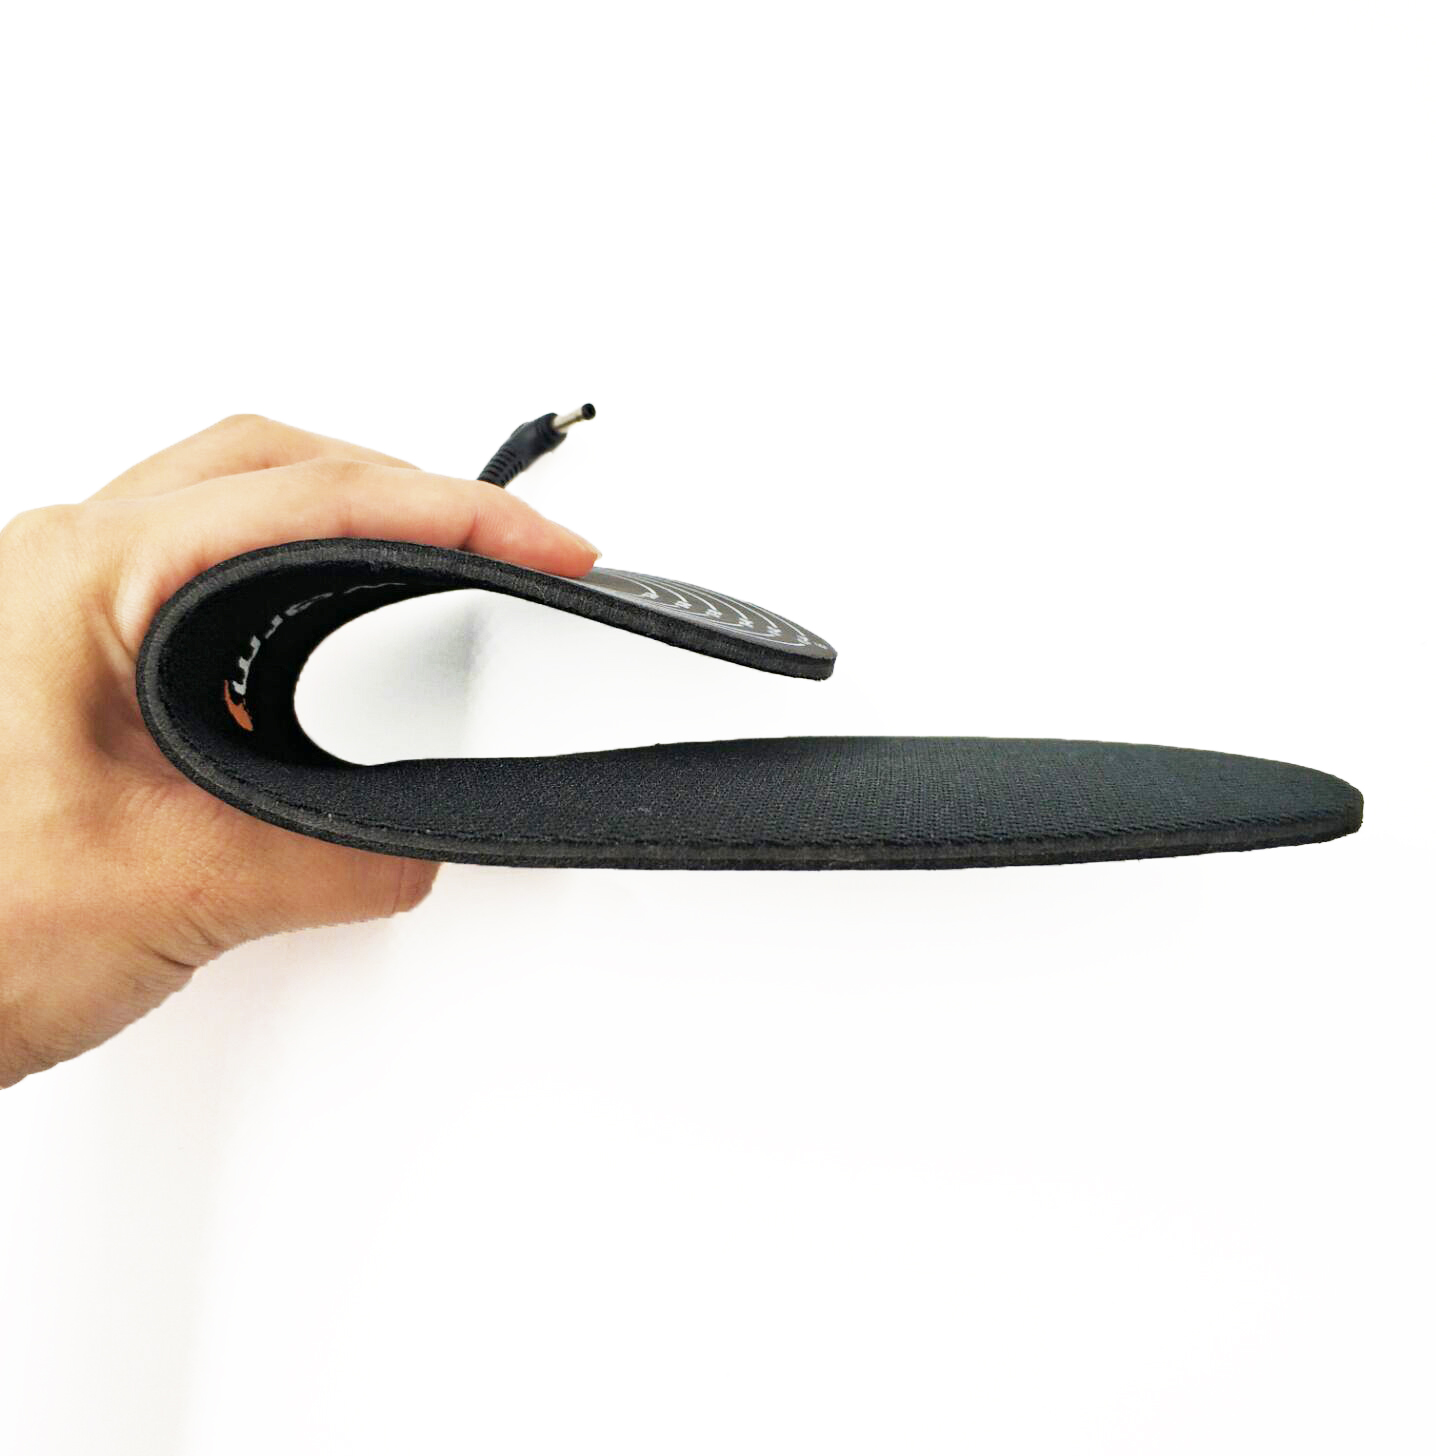 Dr. Warm wire electric heated shoe insoles lasts for 3-7hours for indoor use-13